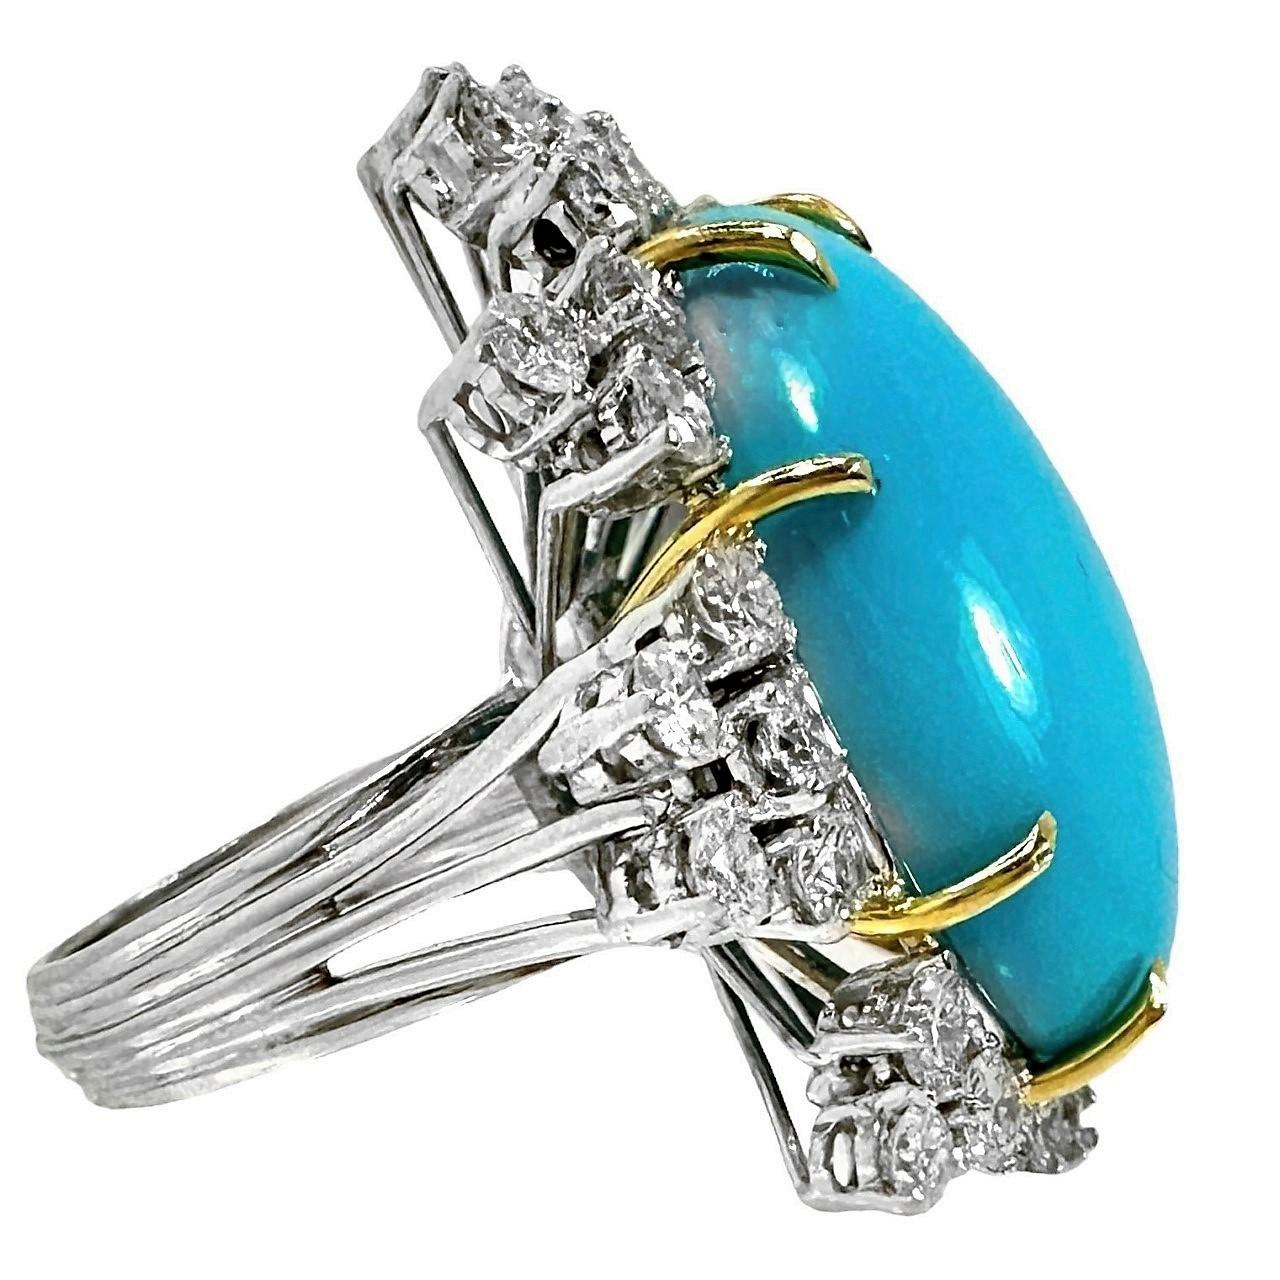 Magnificent Mid-20th Century Turquoise, Diamond and Platinum Cocktail Ring For Sale 1